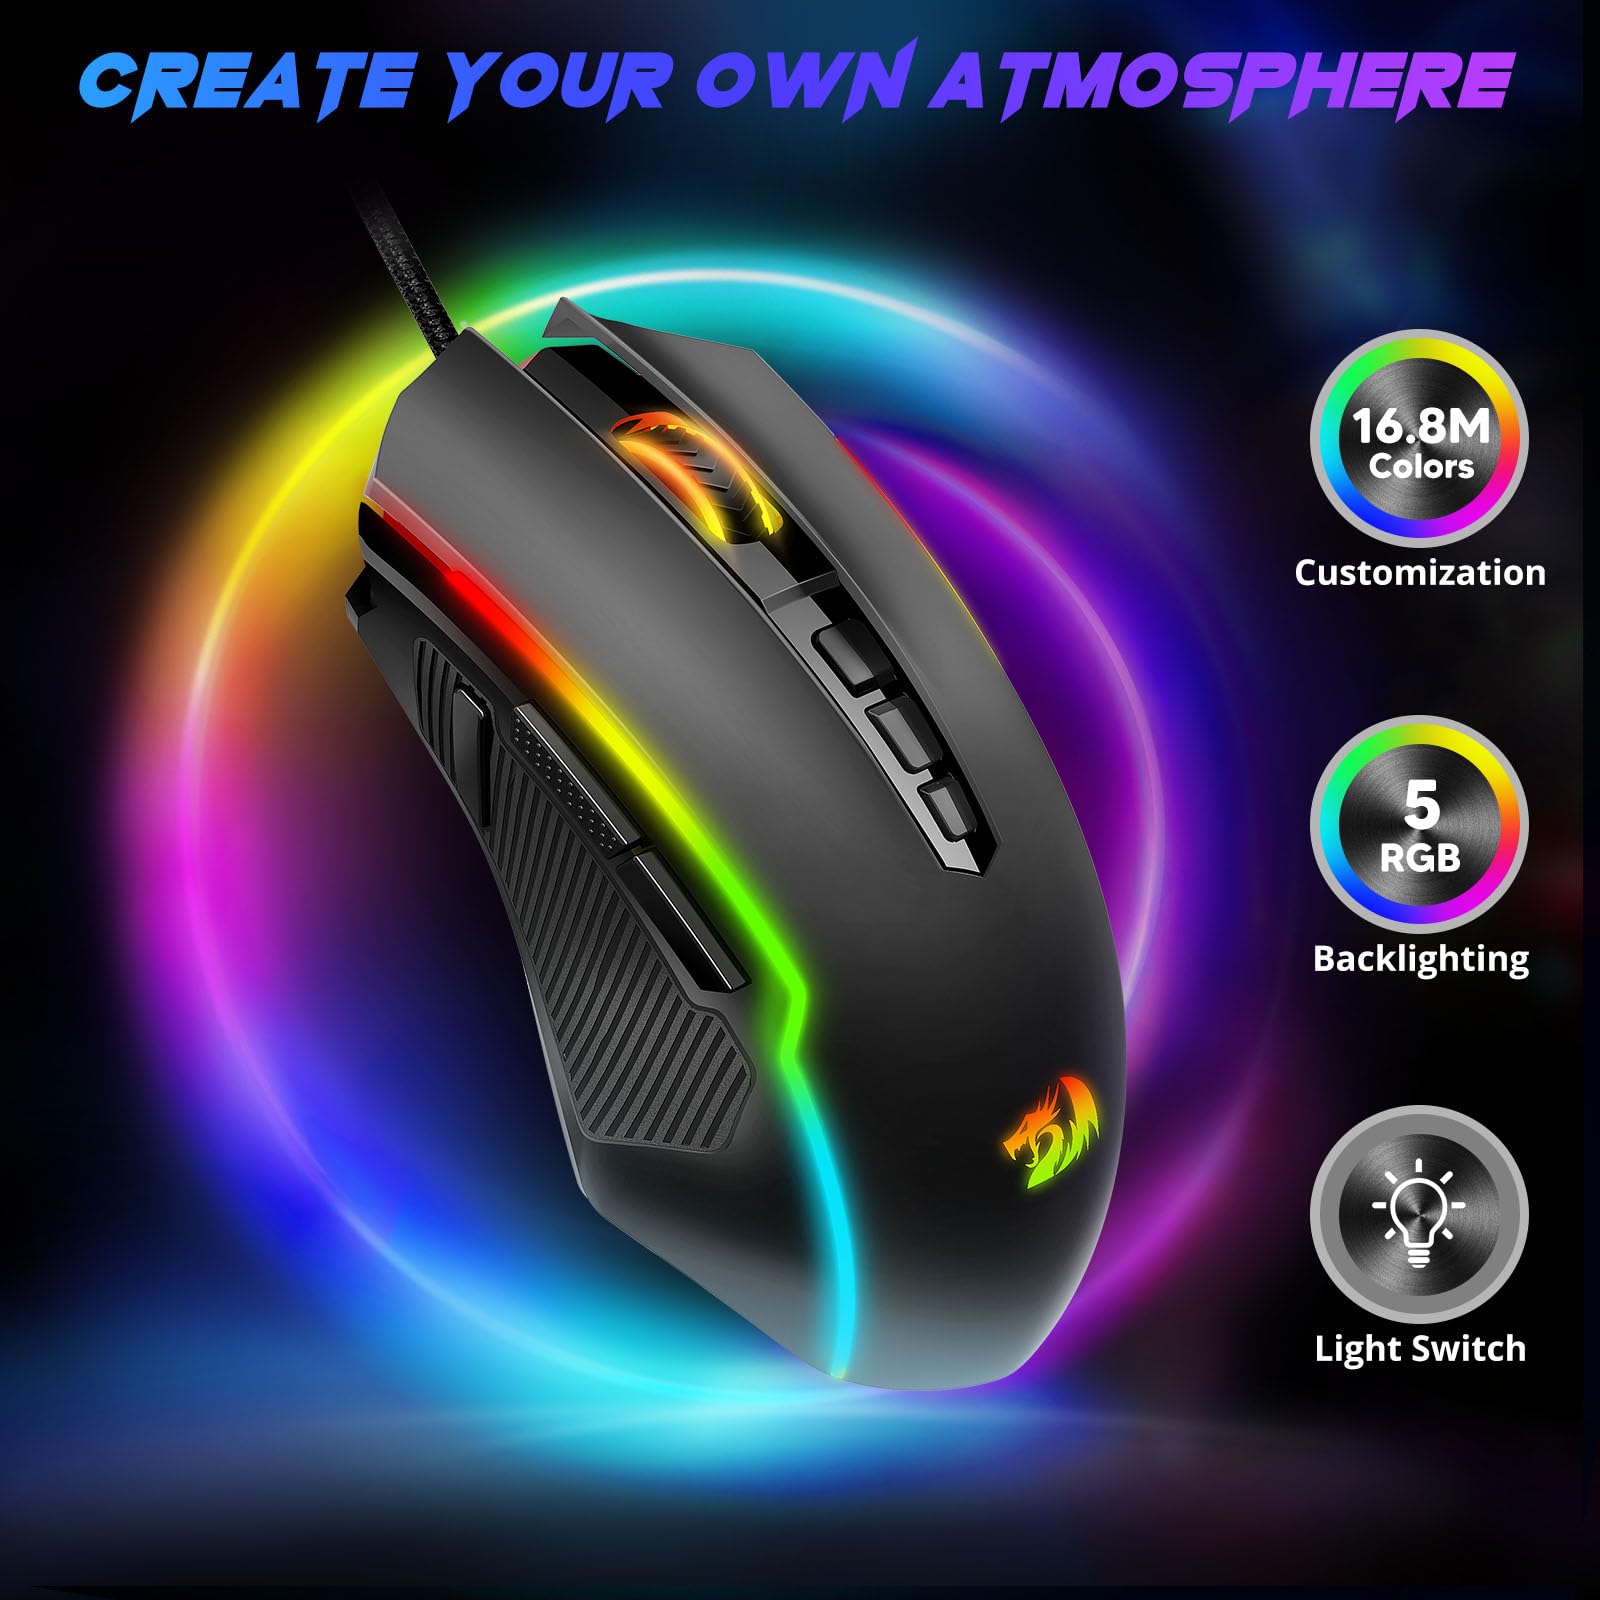 Redragon Gaming Mouse, RGB Gaming Mouse Wired with 9 Programmable Macro Buttons, Chroma RGB Backlit, 8000 DPI Adjustable, PC Gaming Mice with Fire Button for Windows/Mac, Black, M910-K